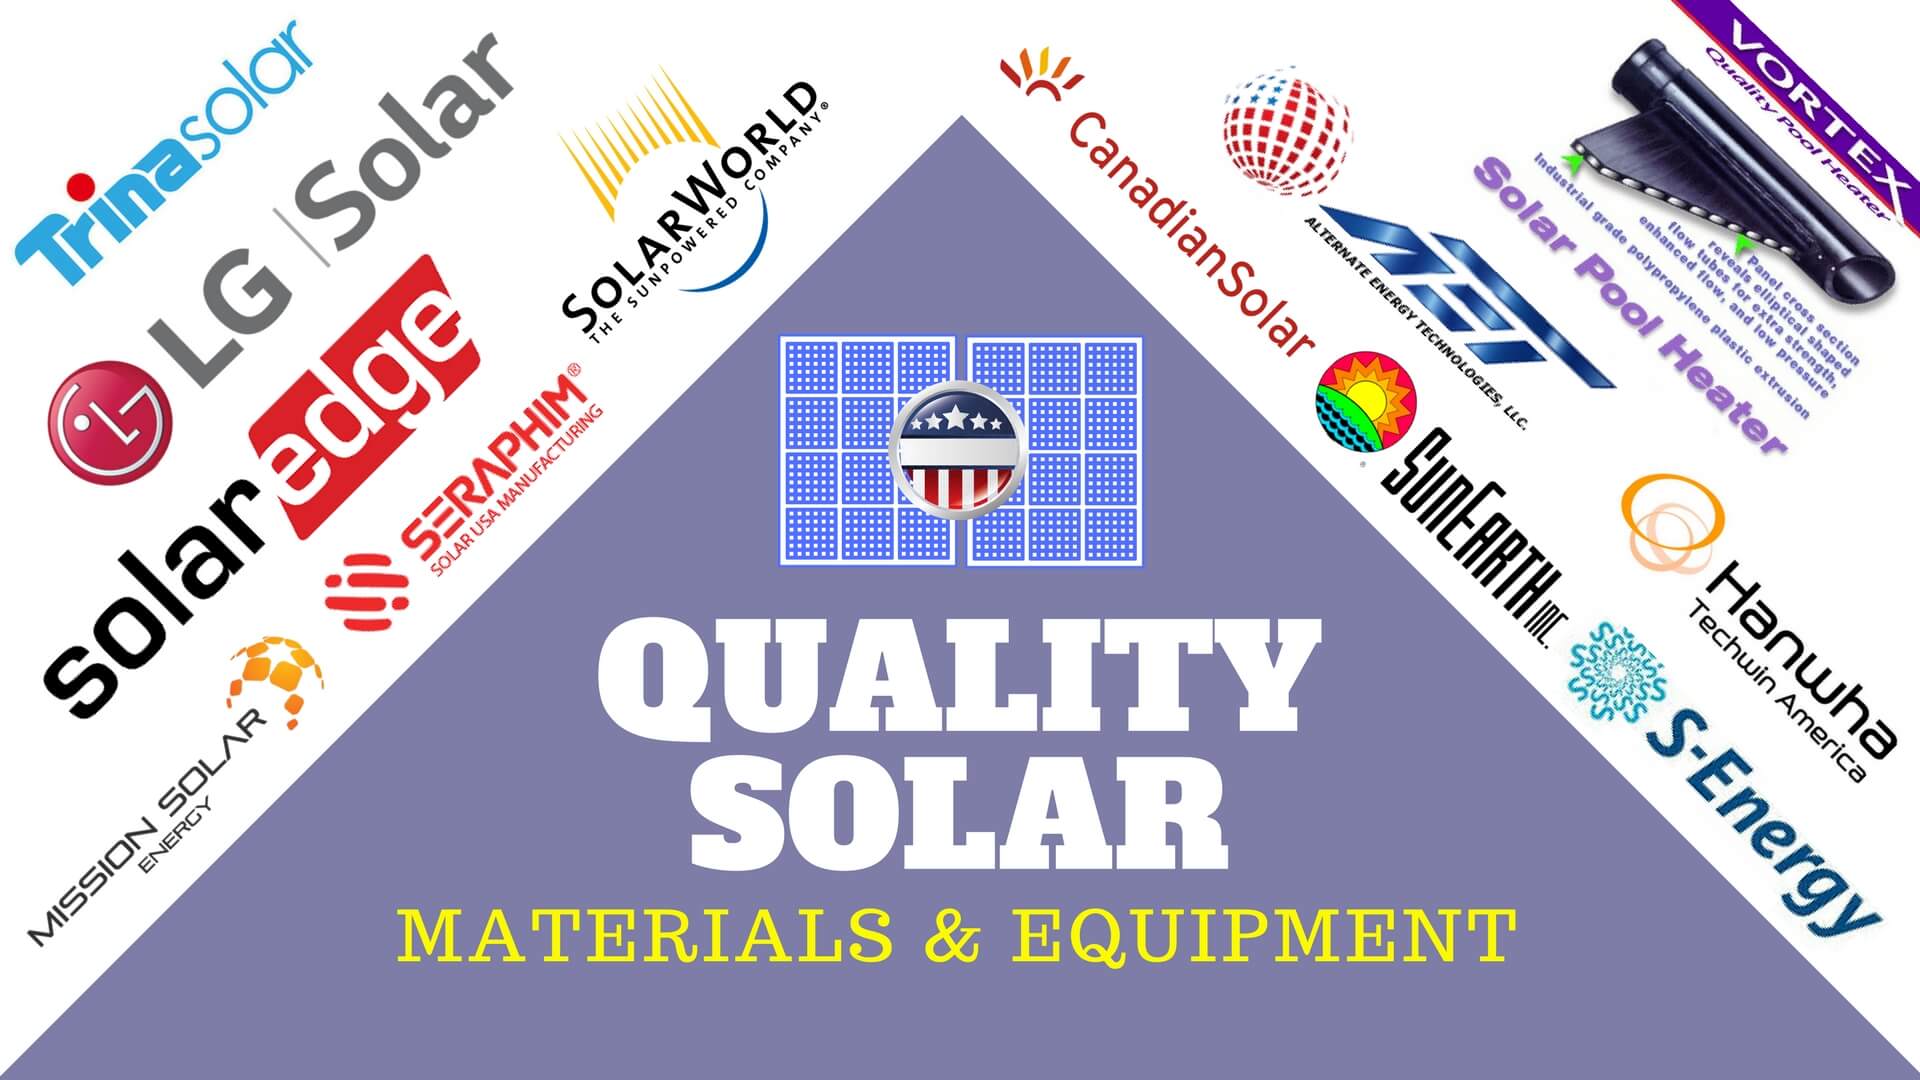 We offer quality, Tier 1 Solar Energy Materials and Equipment, Solar Electric Systems, Solar Hot Water Systems, Solar Pool Heating Systems for Residential and Commercial Applications